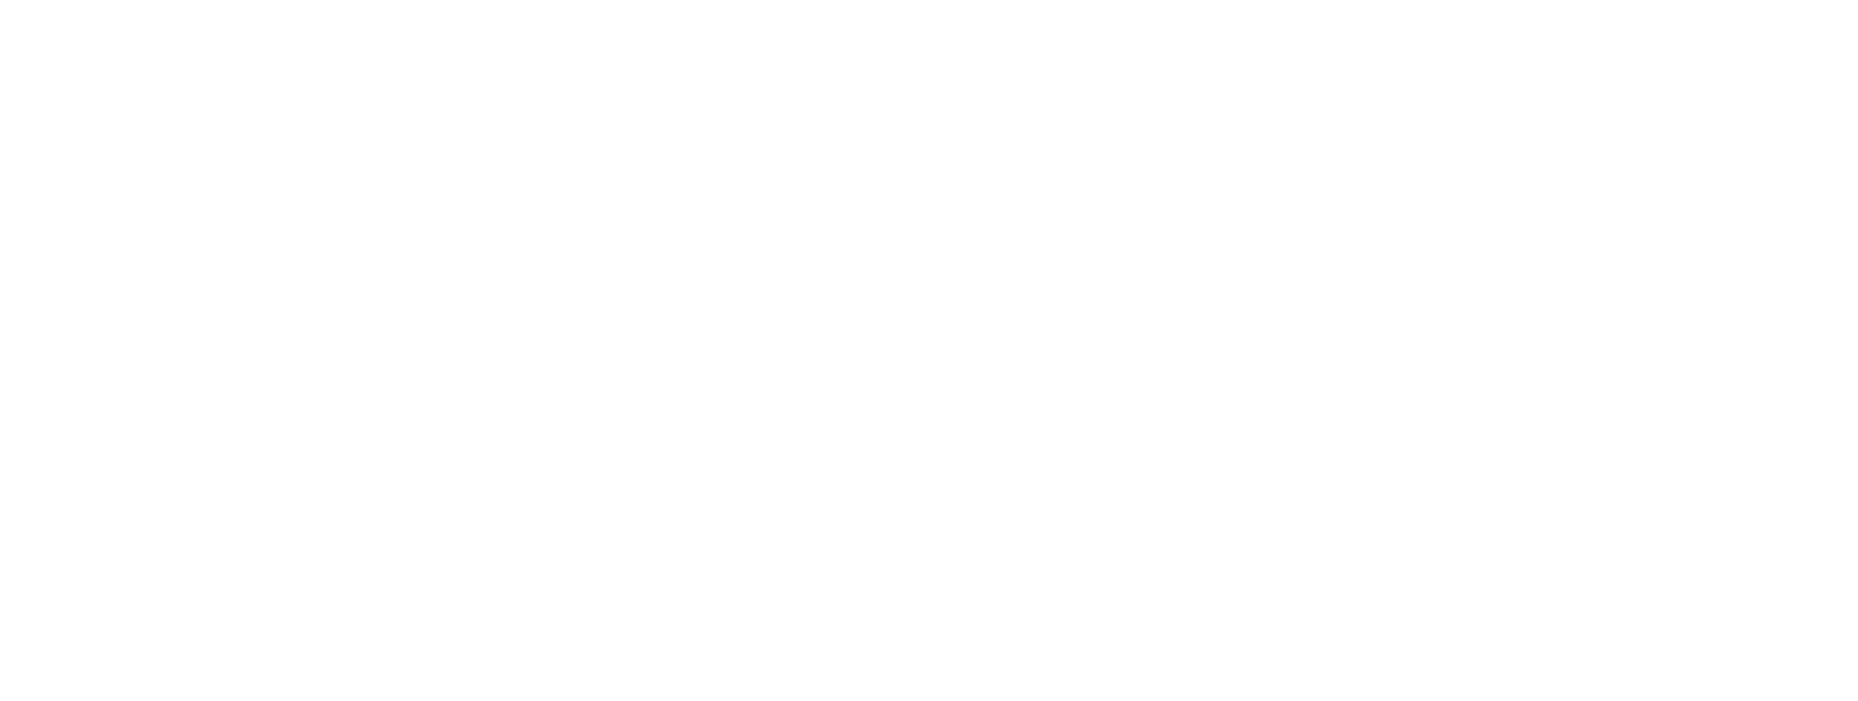 Watson Institute for International and Public Affairs Career Portal